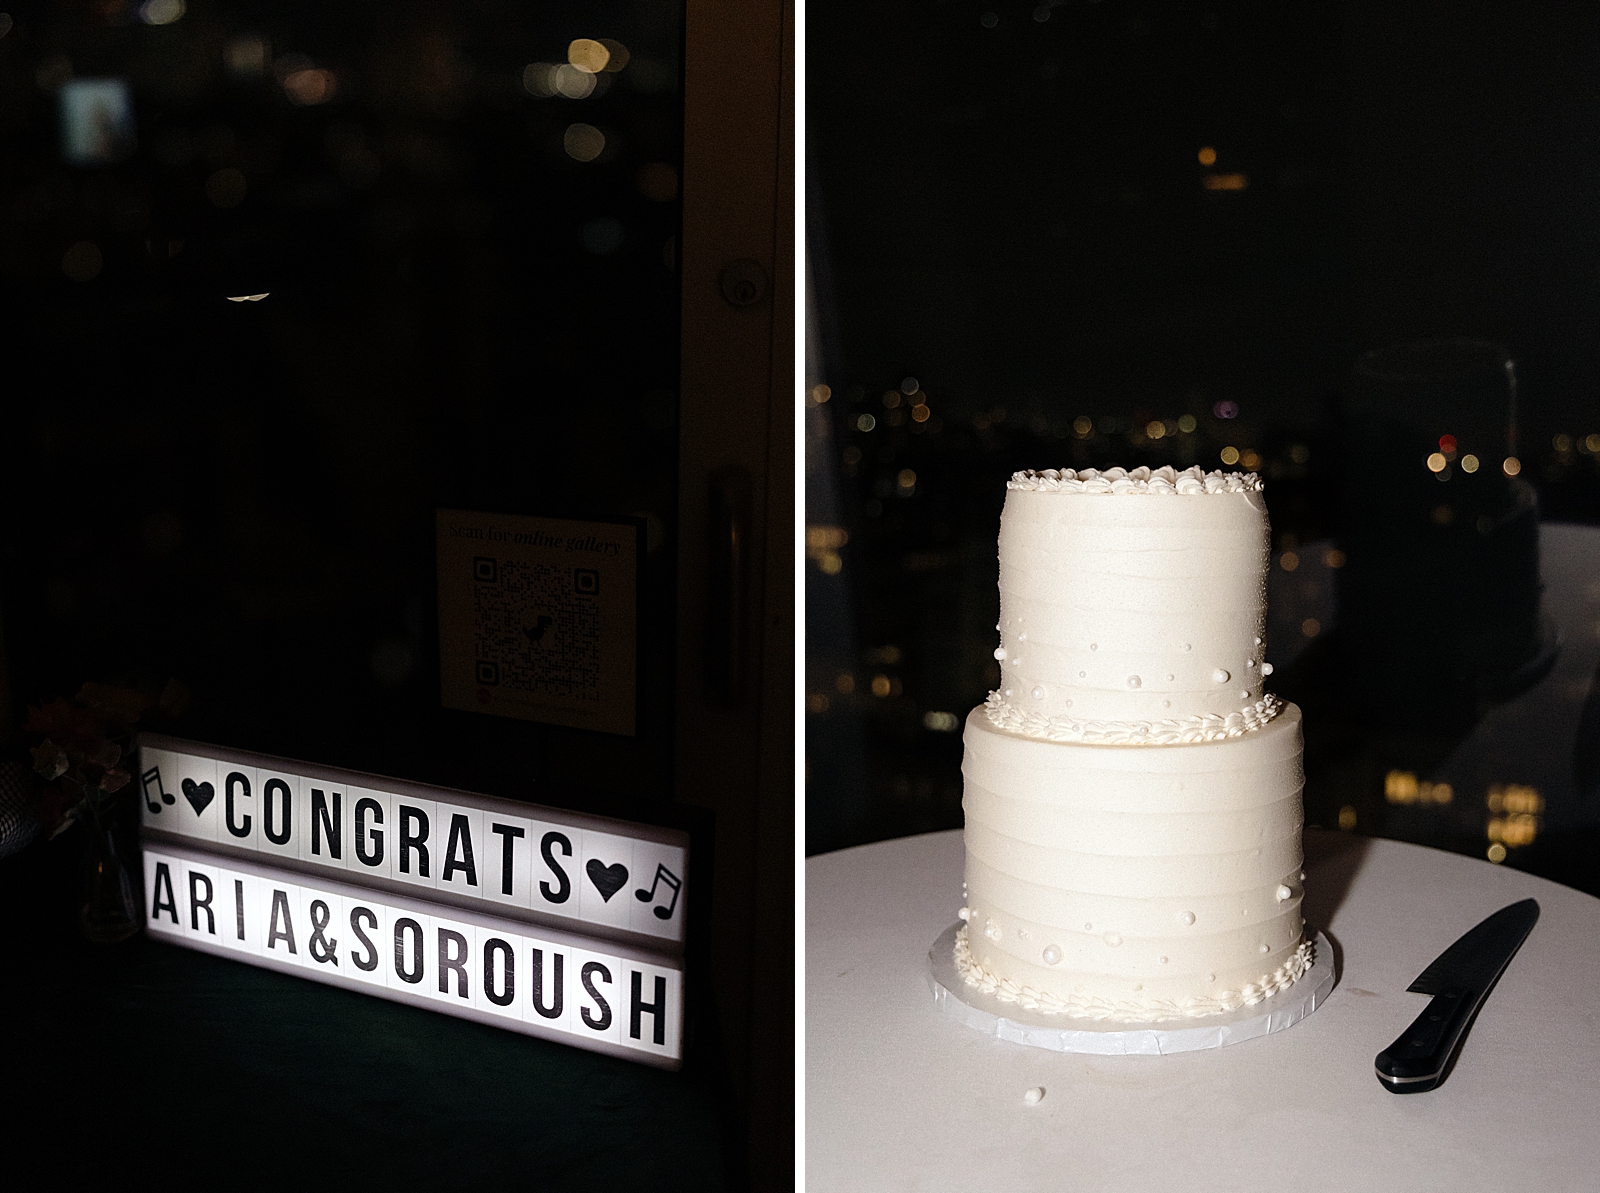 Left photo: Shot of a sign that says, "Congrats, Aria & Soroush." 
Right photo: Full shot of the wedding cake. 